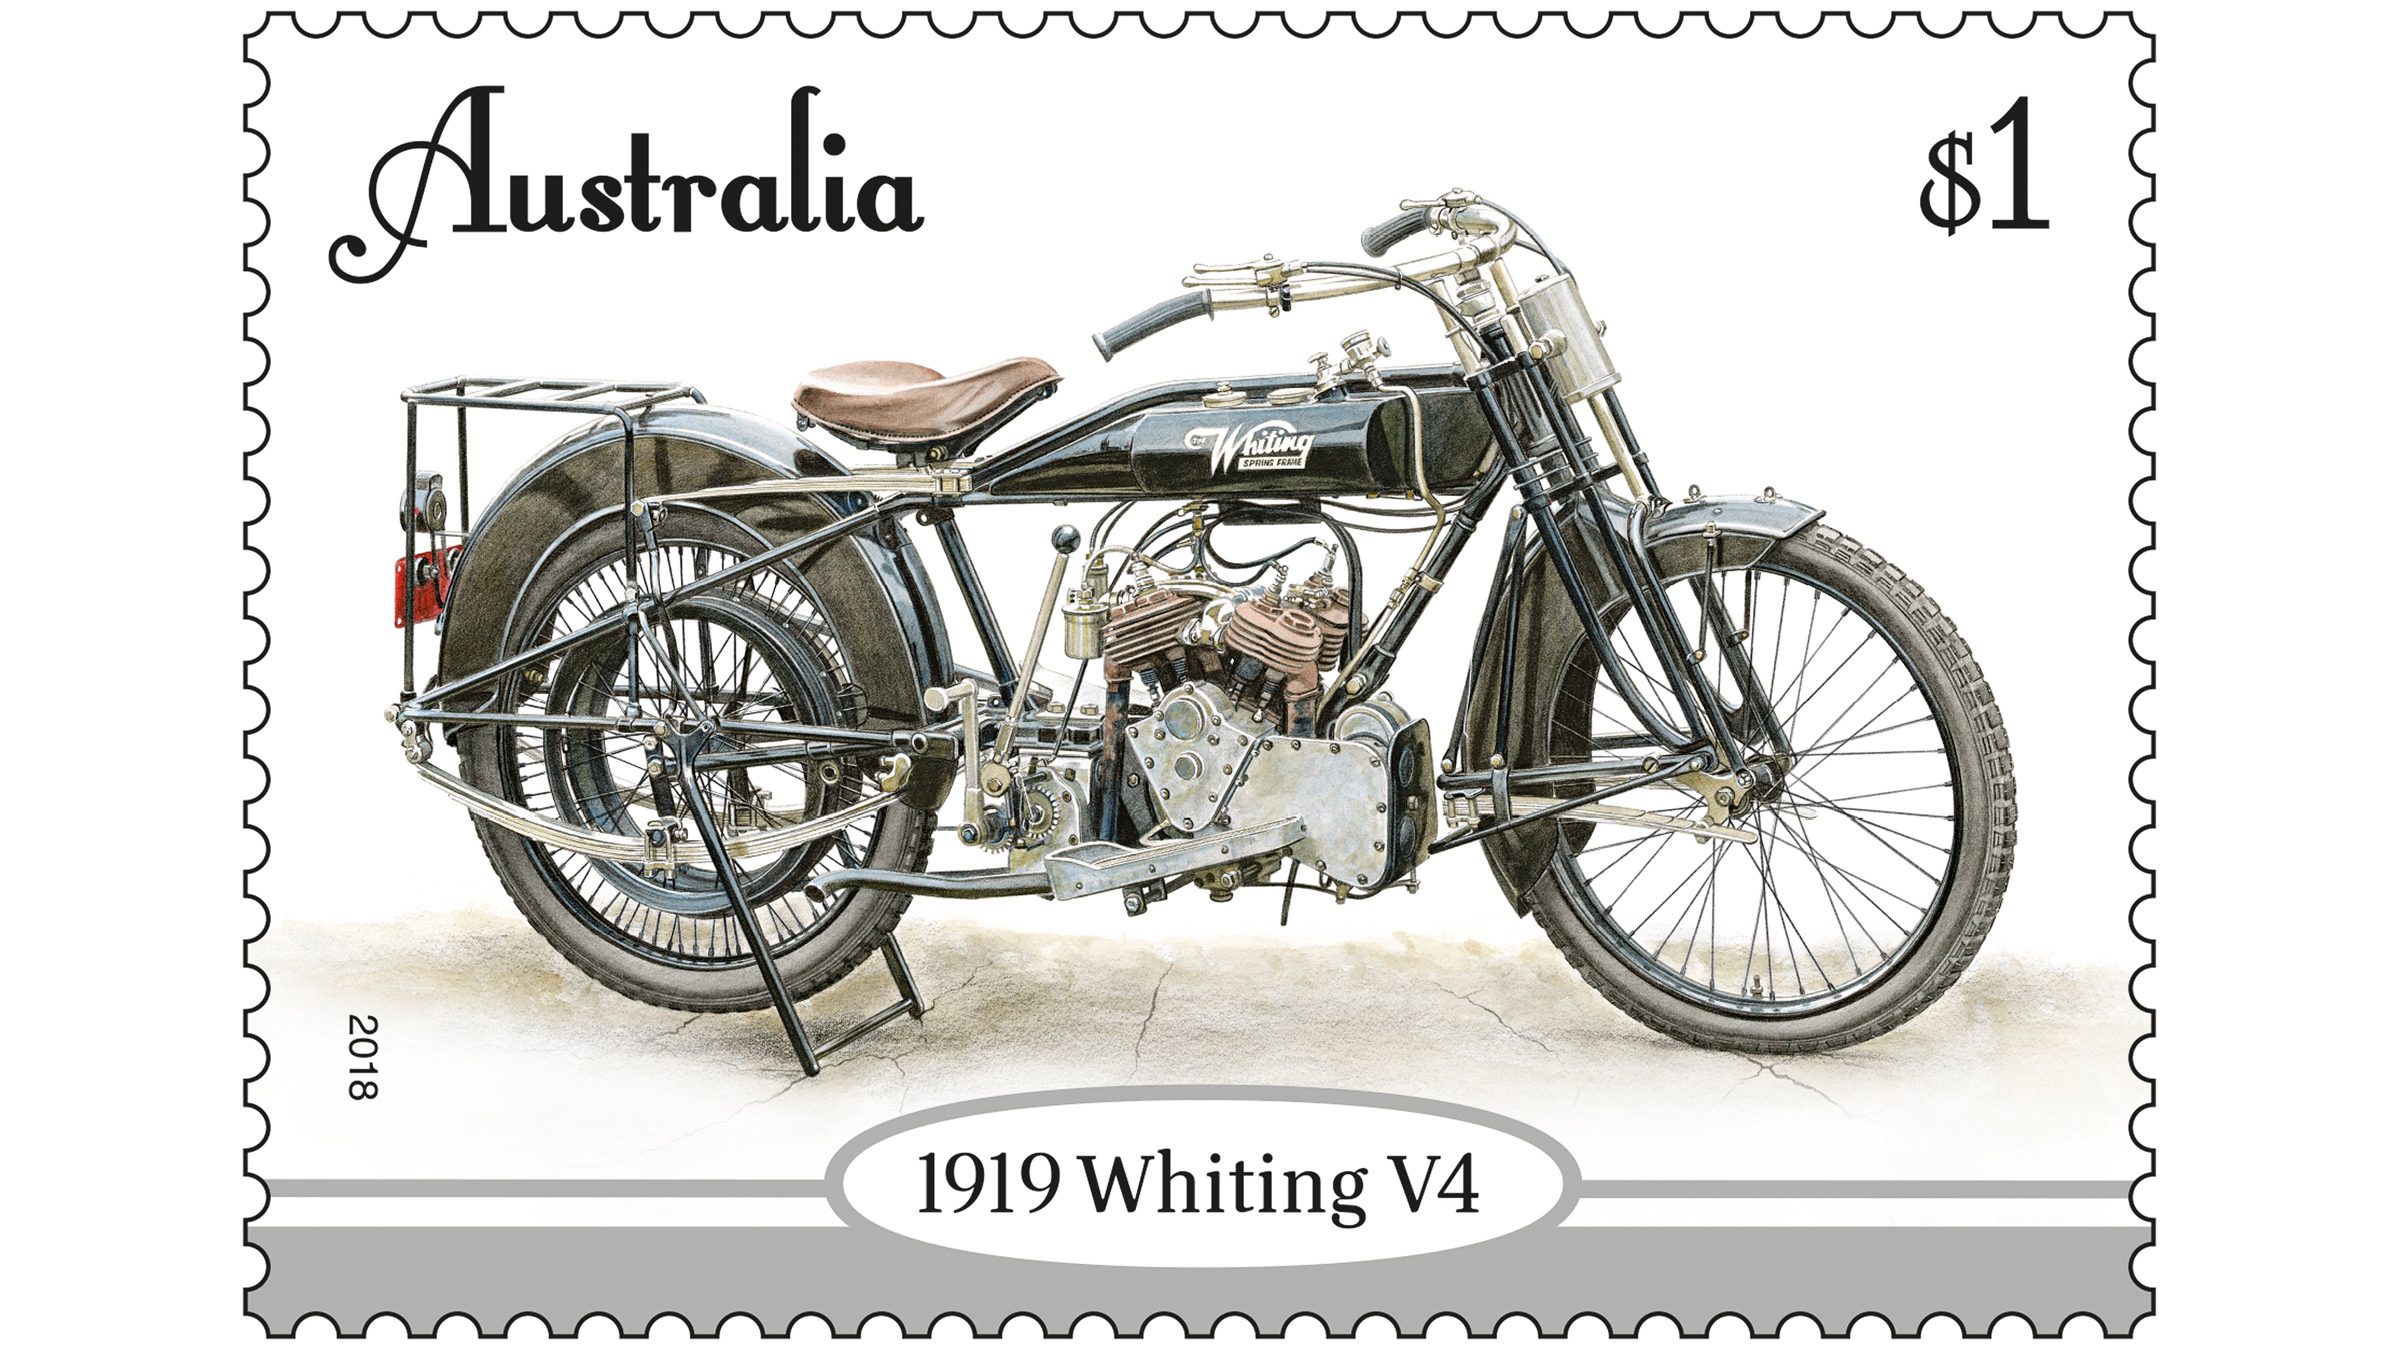 An Australia Post commemorative stamp showing the 1919 Whiting 685cc V4 motorcycle